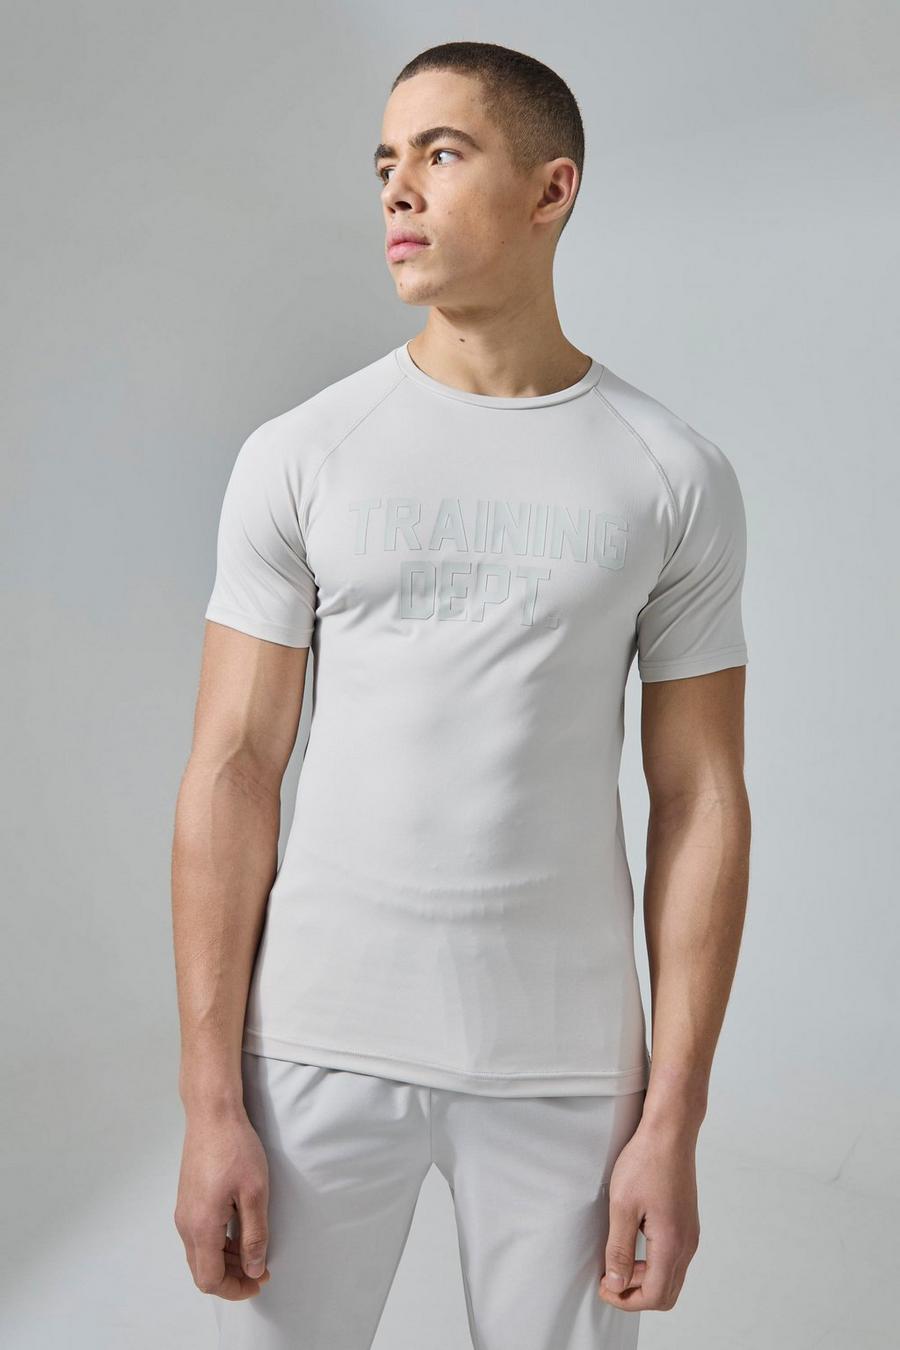 Active Trainings Dept Muscle-Fit T-Shirt, Light grey image number 1